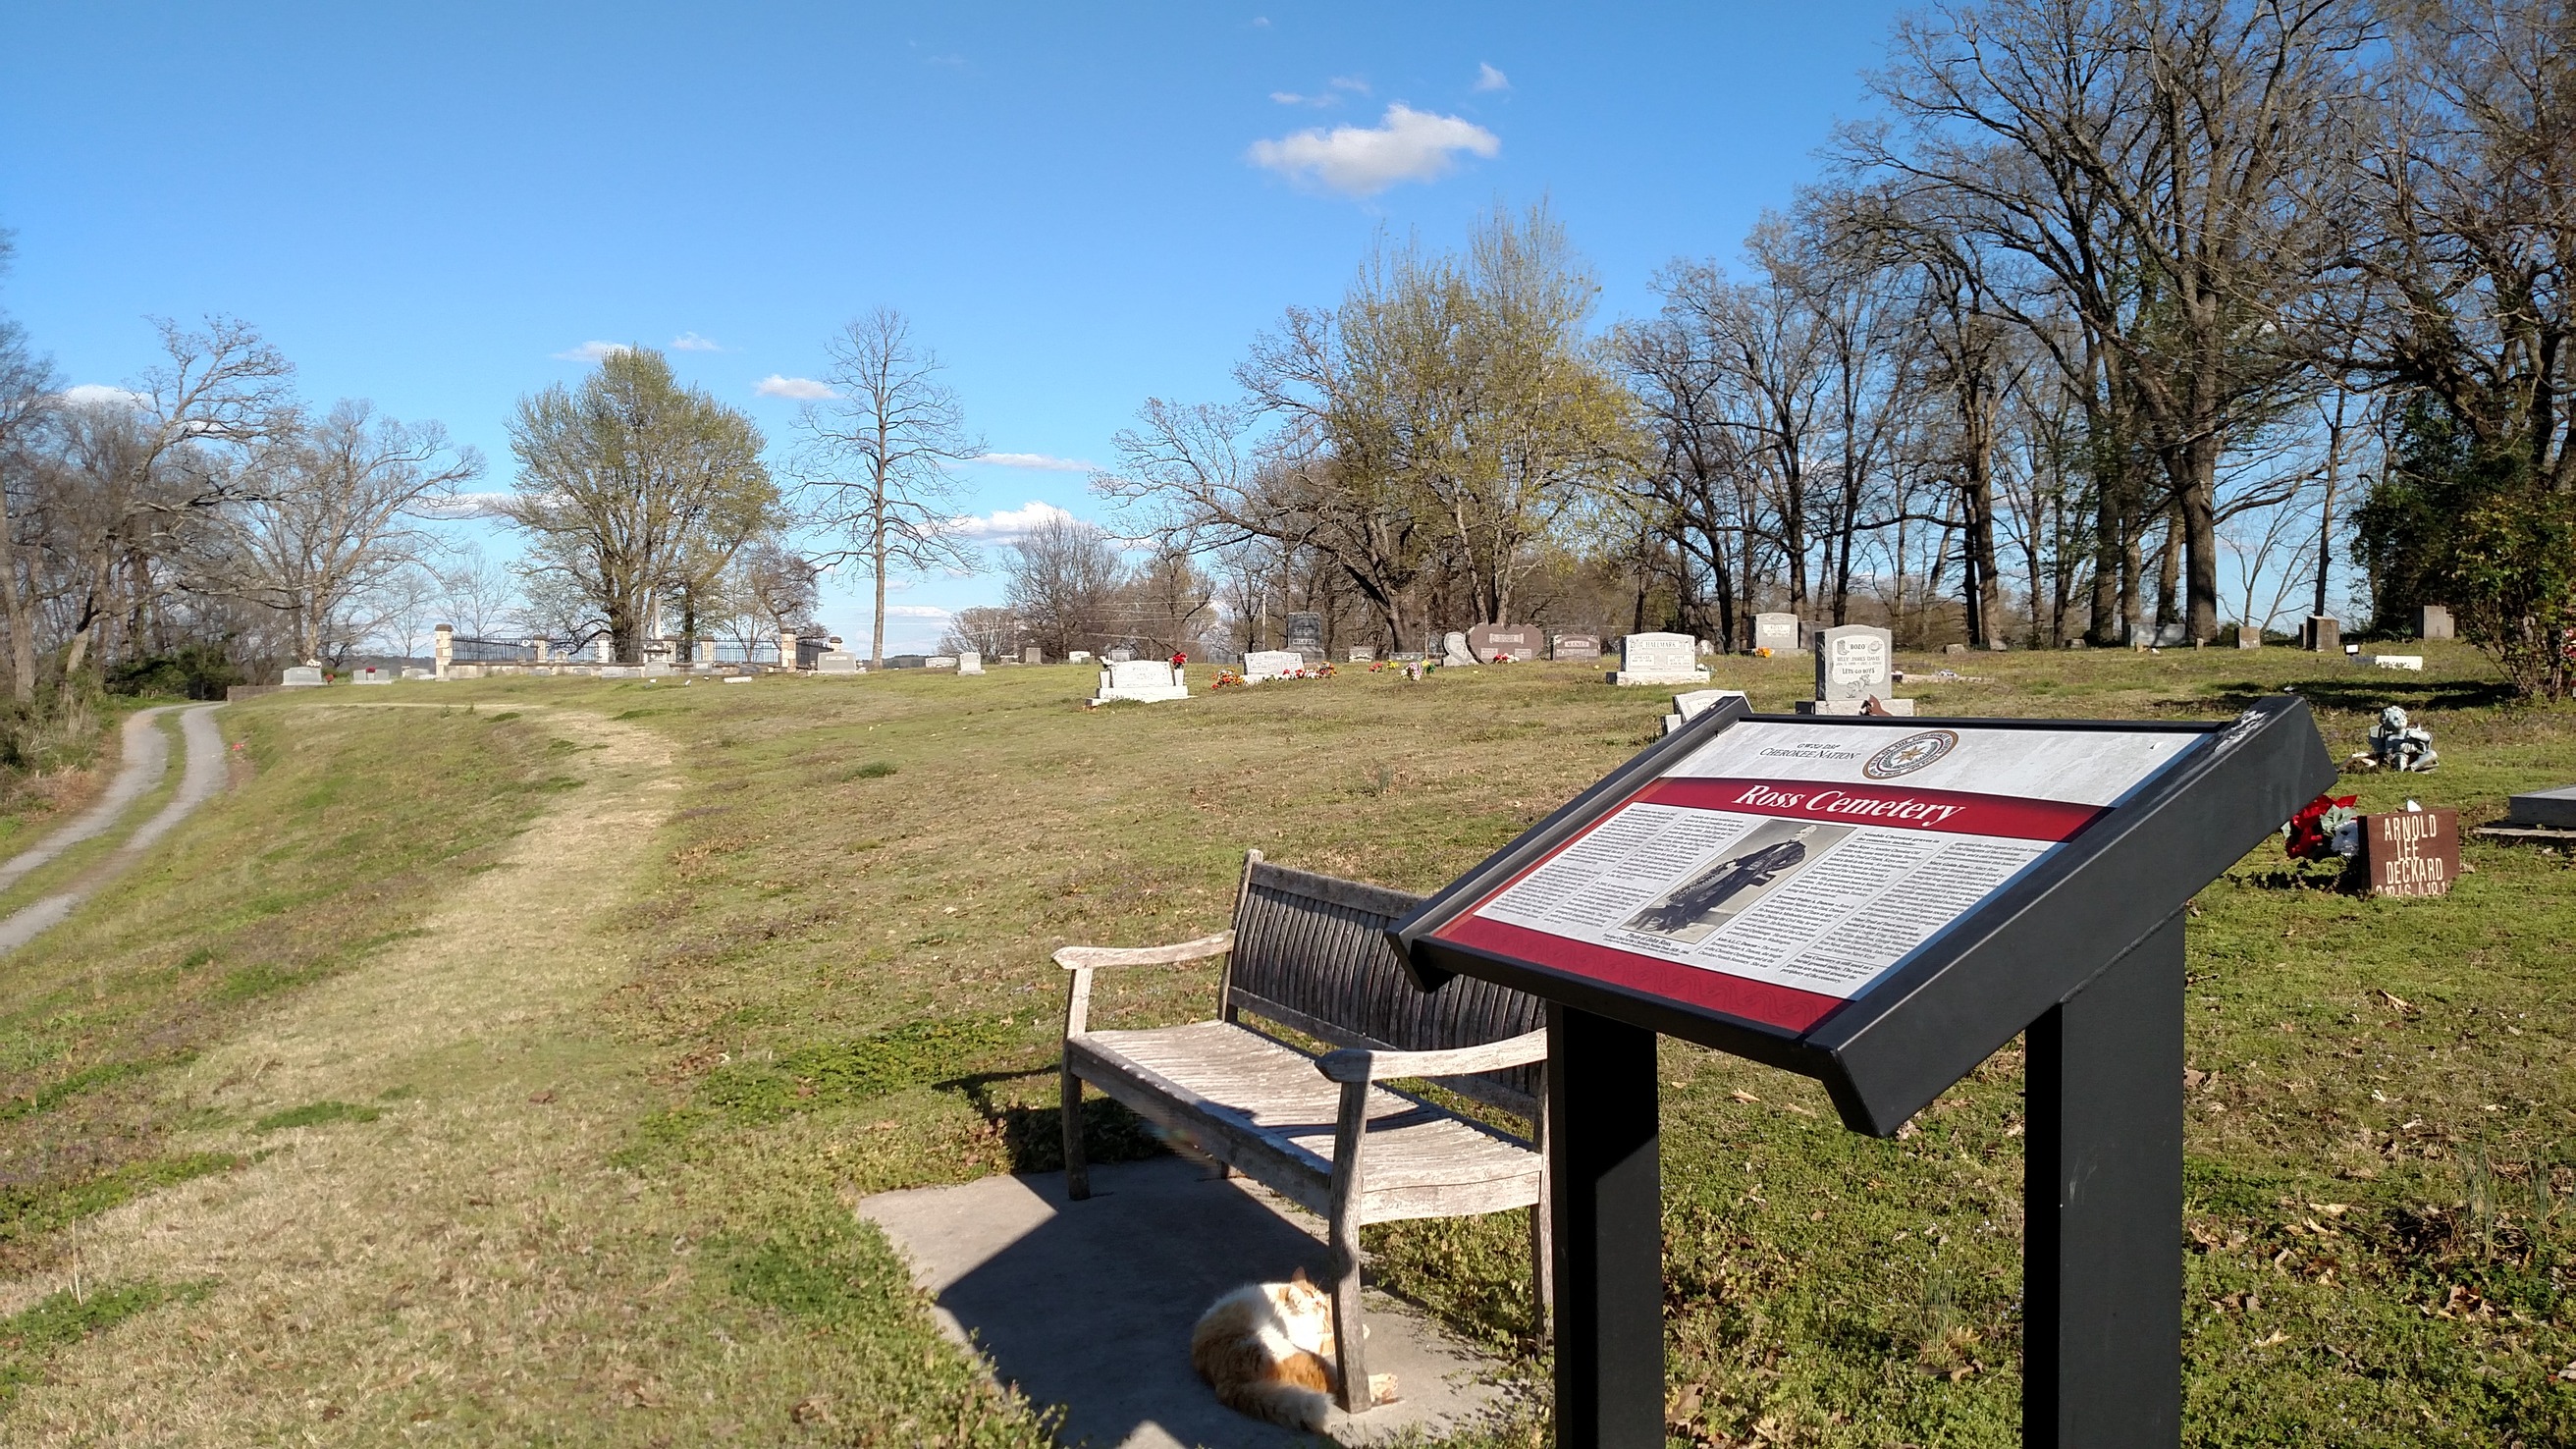 A cat lounges in the sun at the Ross Cemetery wayside in Park Hill, Oklahoma